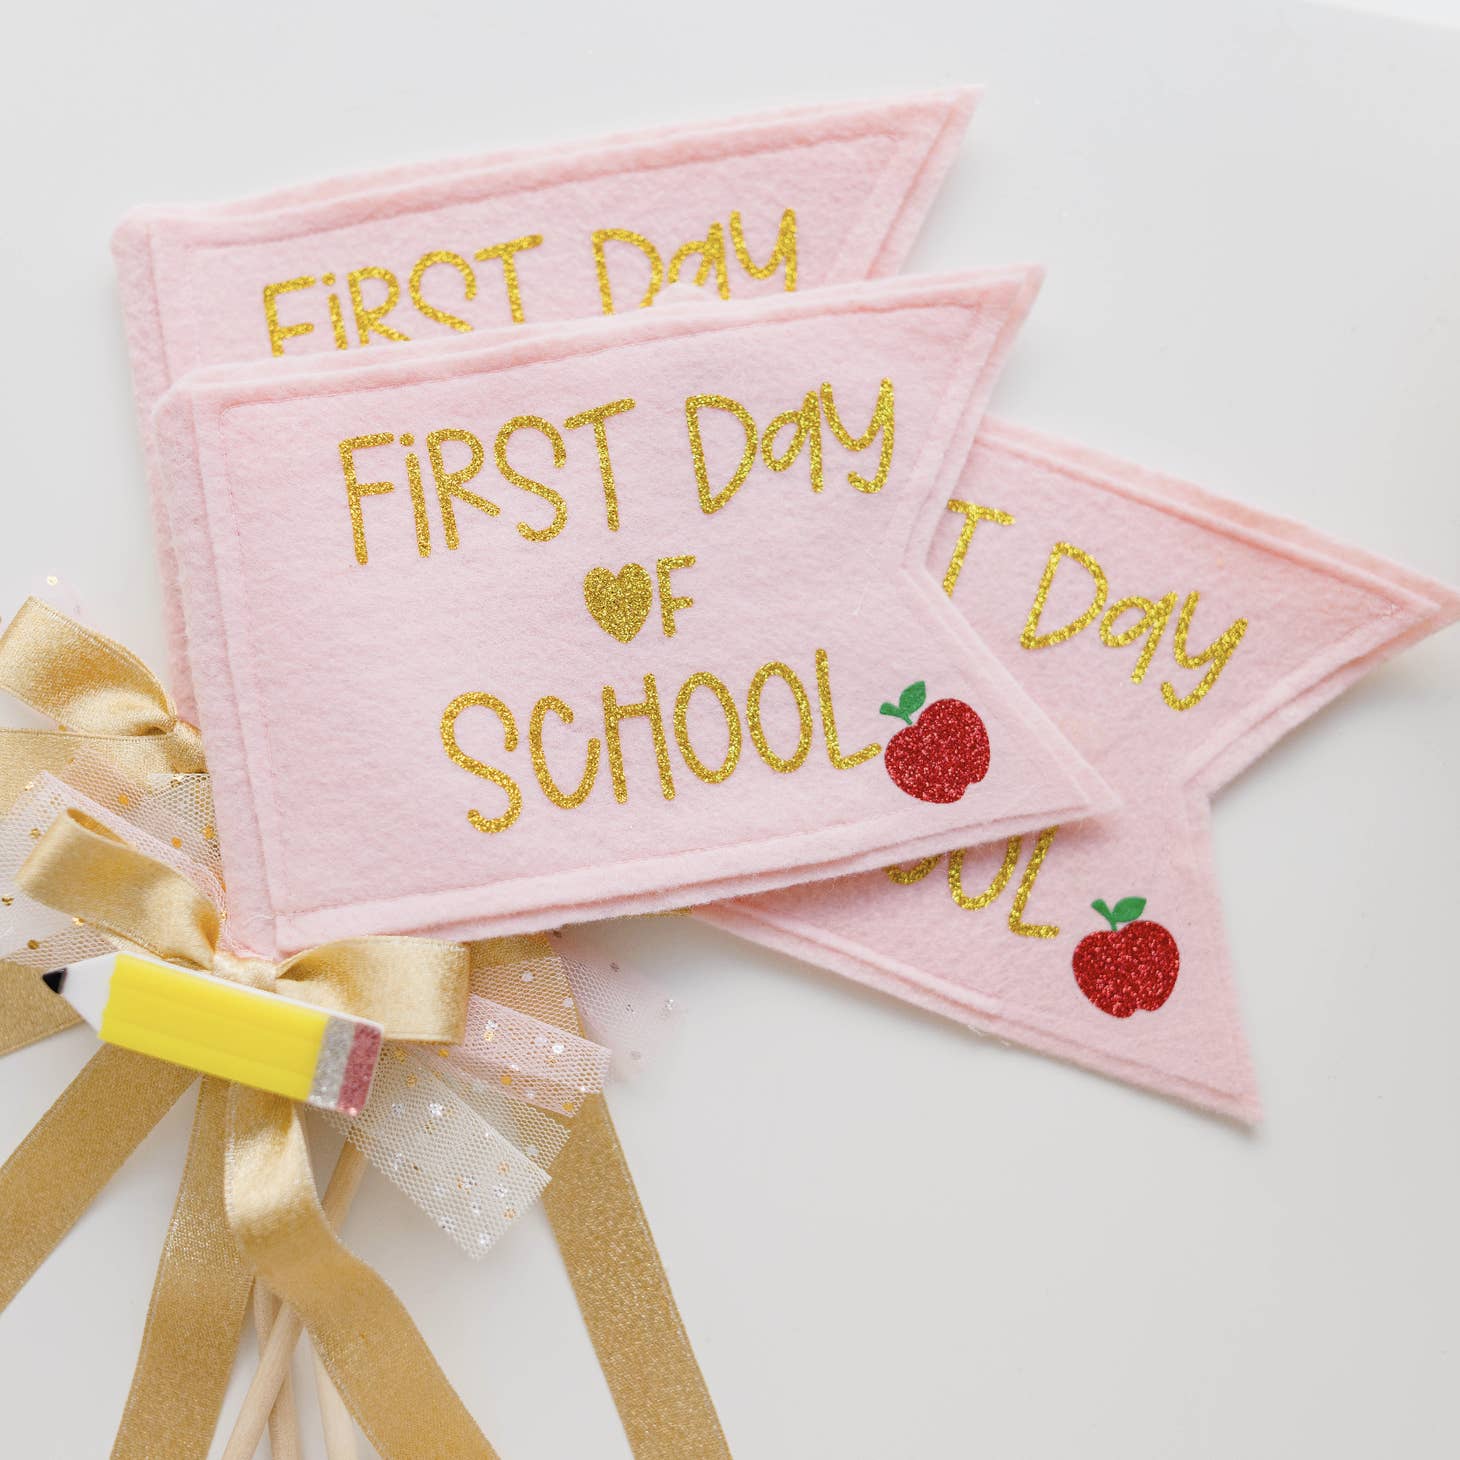 Back To School Pennant Flag with Hair Clip - Pink Red Apple-Favorite Little Things Co